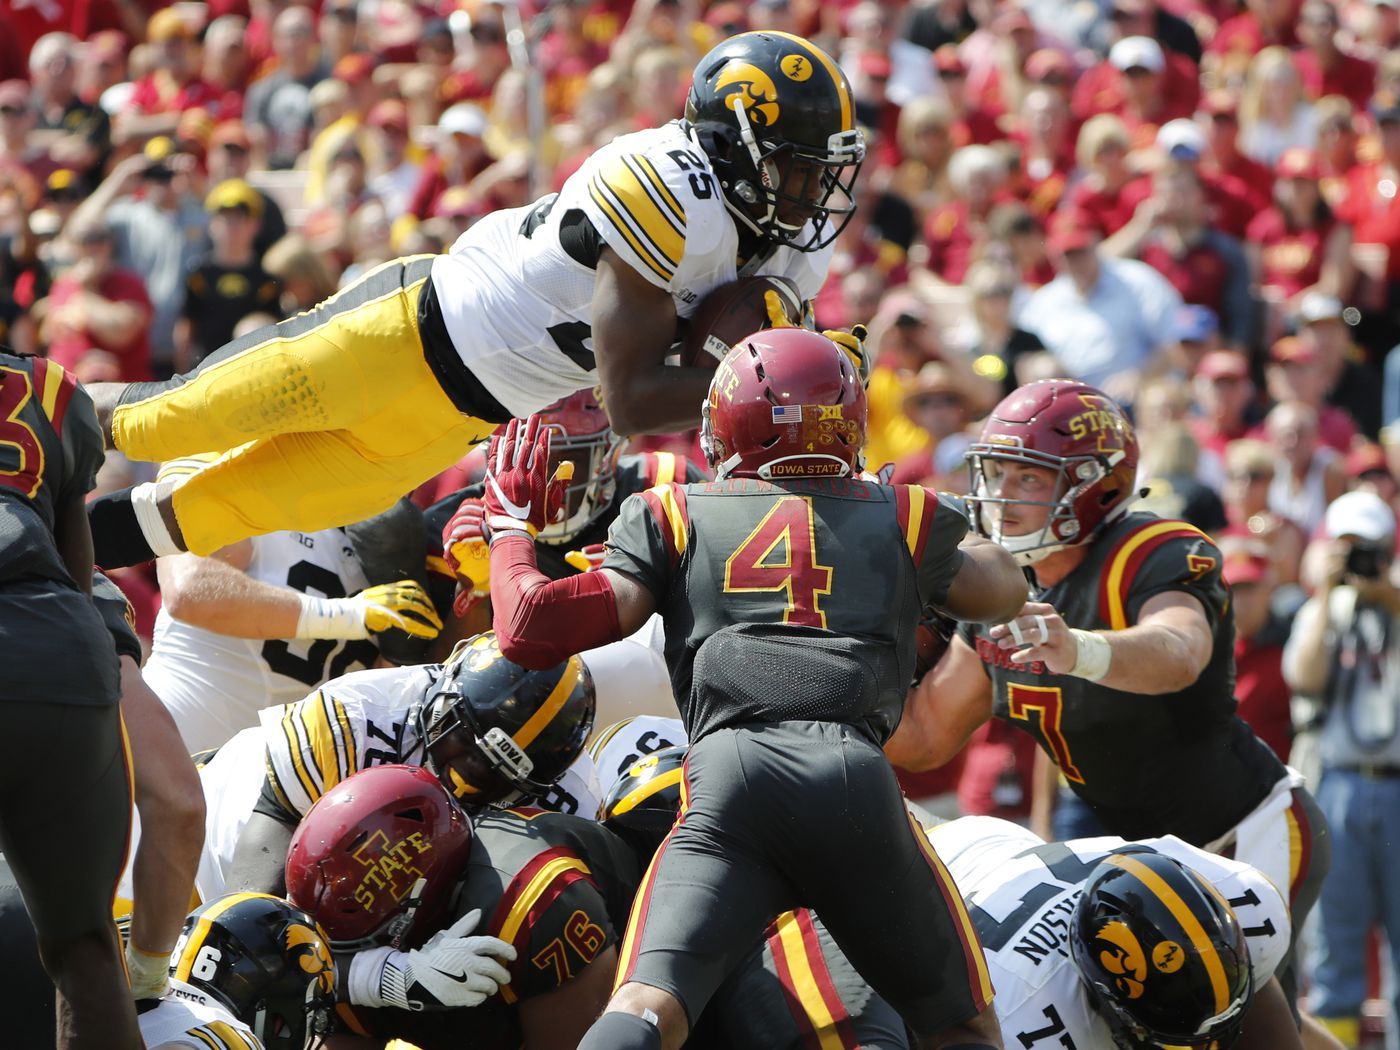 Iowa vs. Iowa State 2017: 9 cool things about the Hawkeyes win